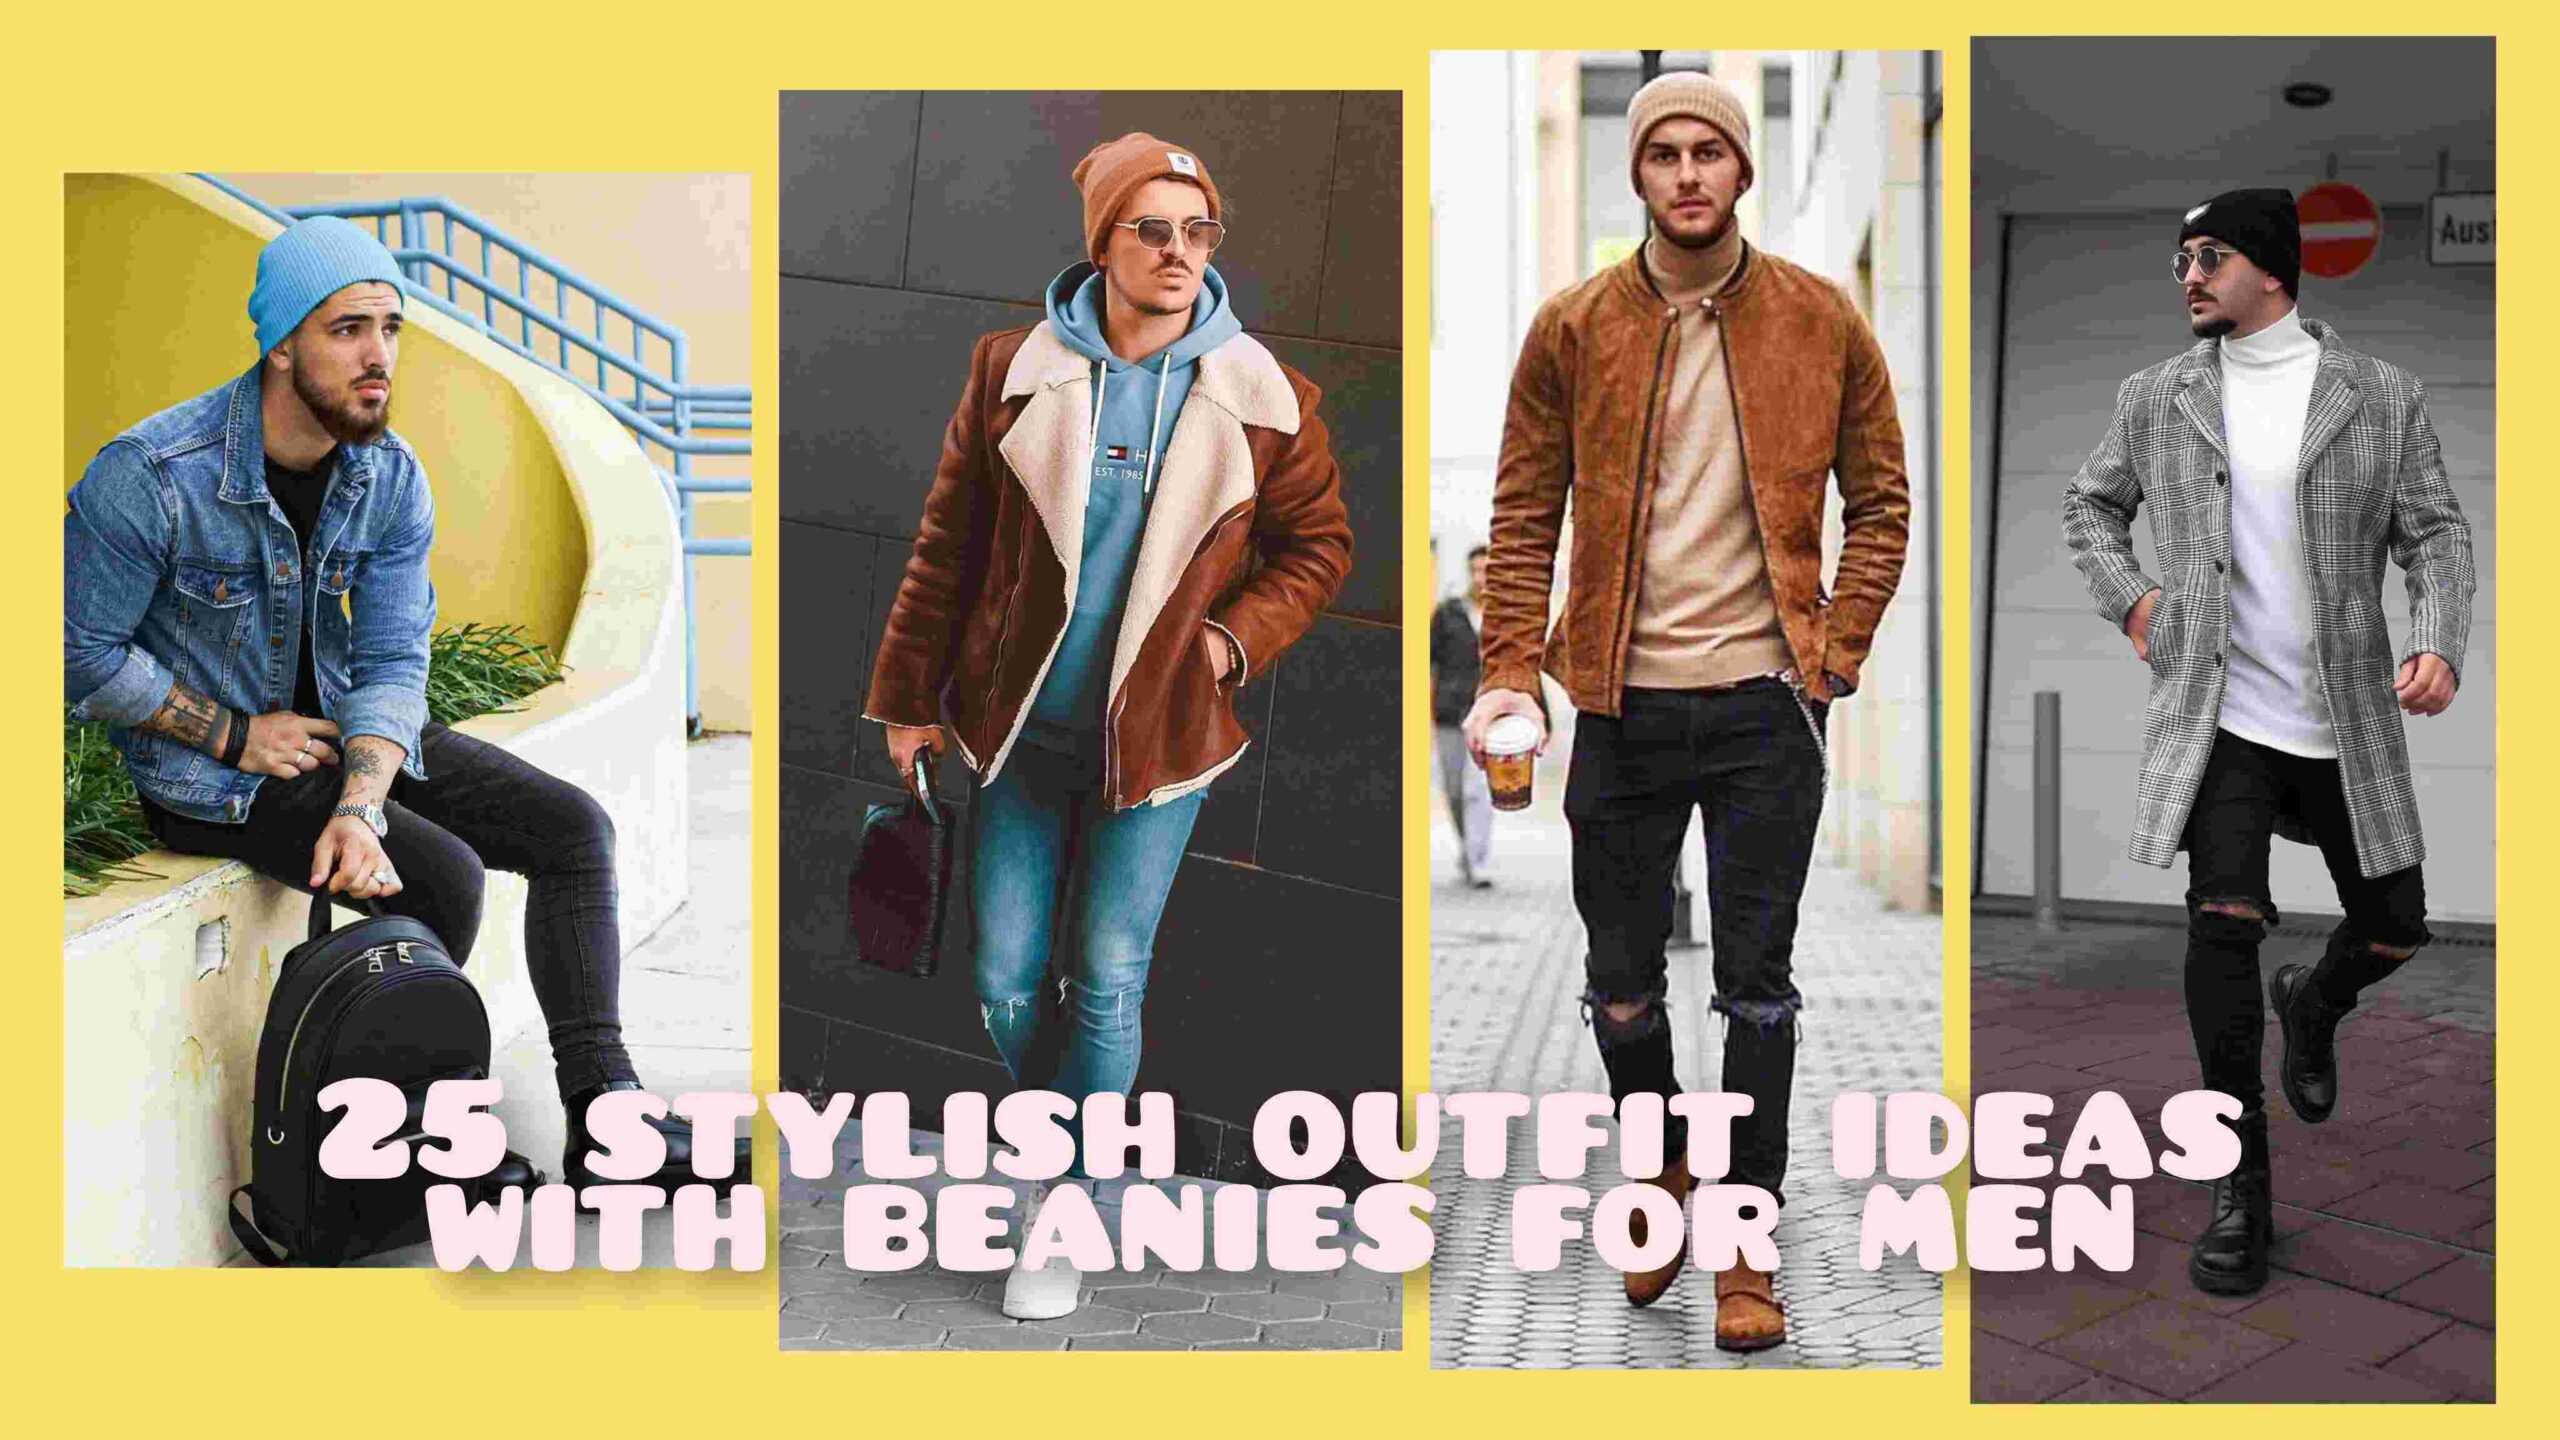 25 stylish outfit ideas with beanies for guys. - vogueymen.com